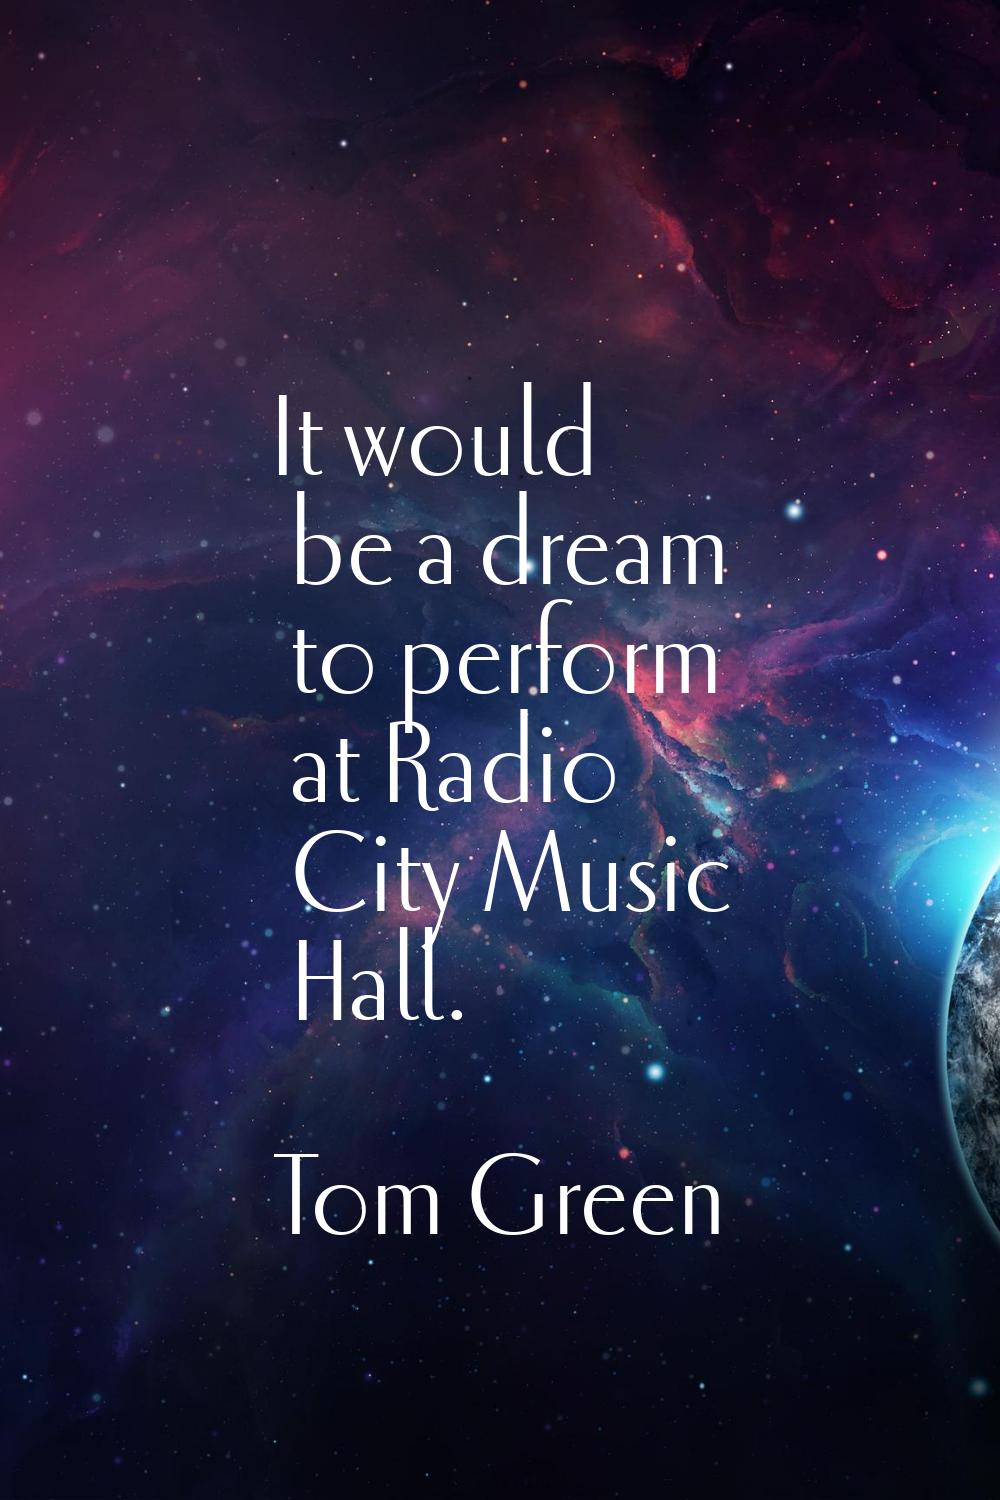 It would be a dream to perform at Radio City Music Hall.